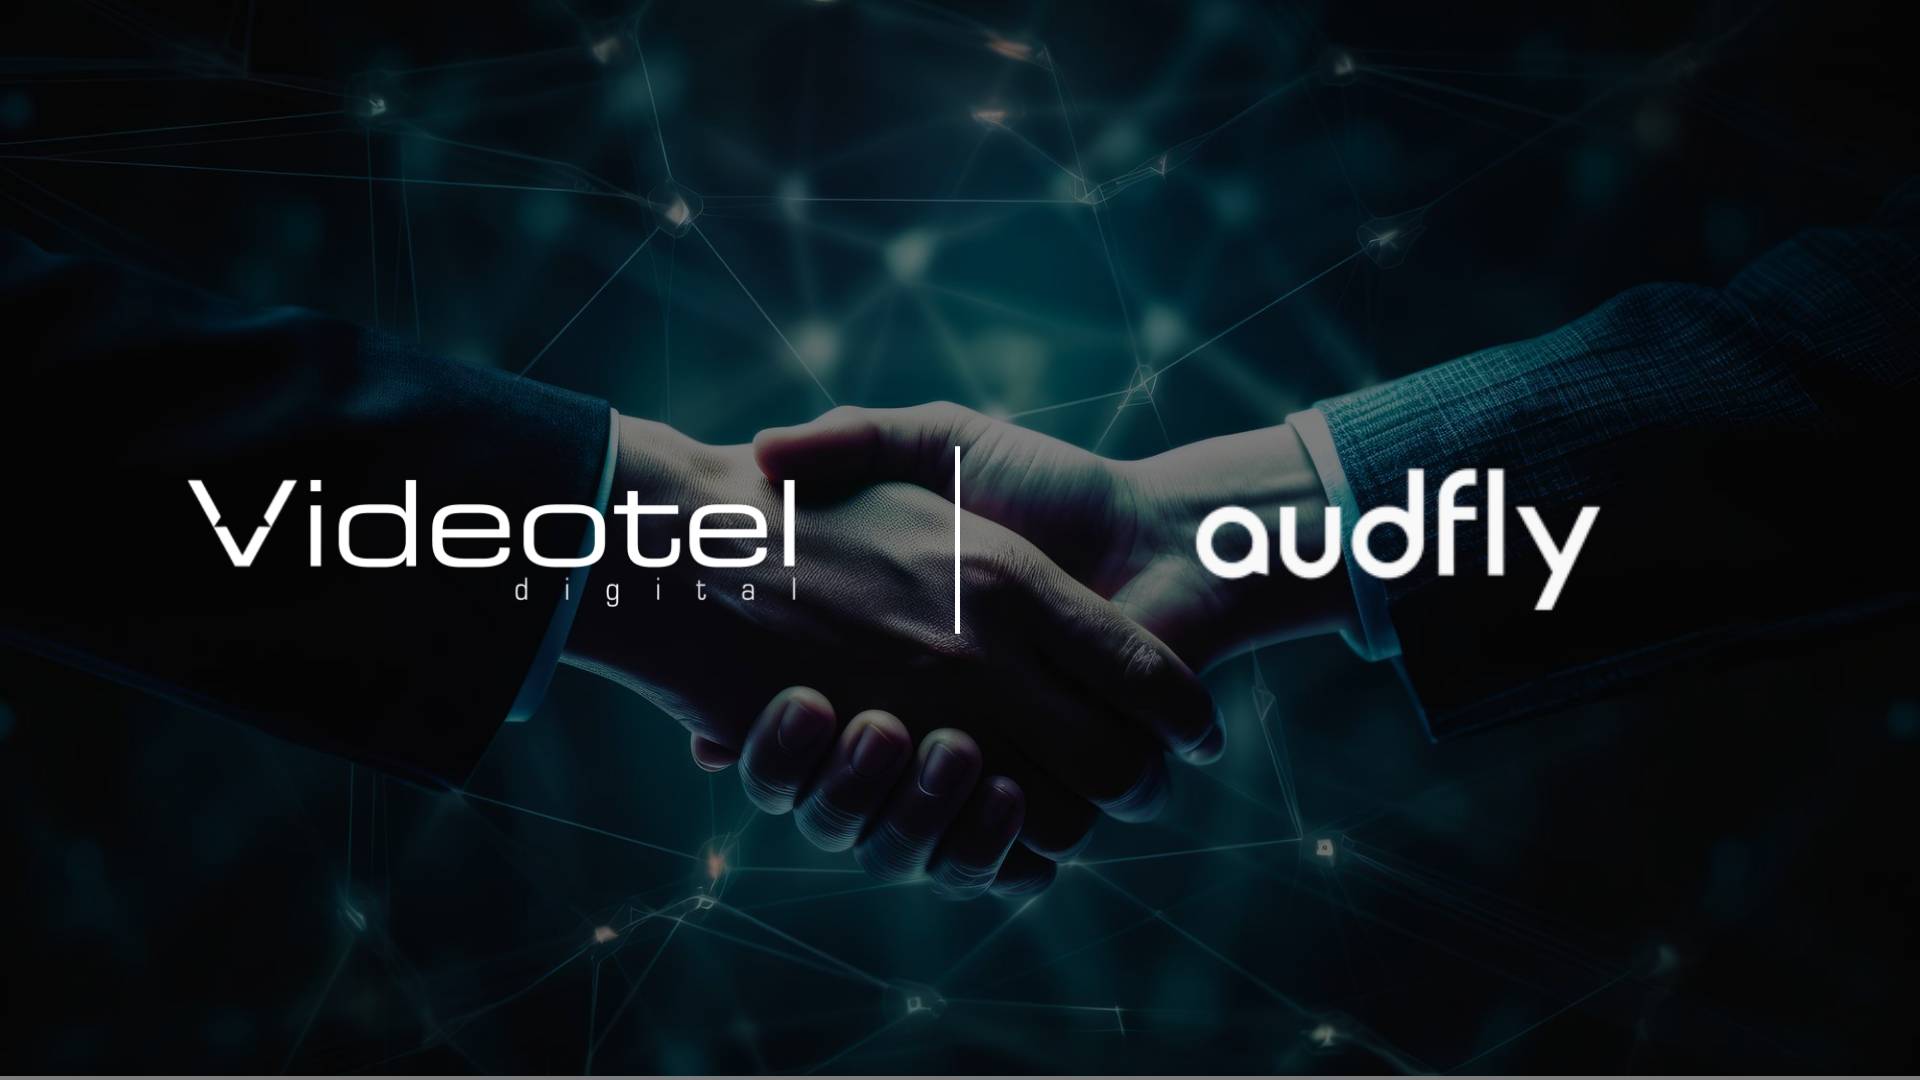 Videotel Digital Partners with Audfly to Redefine Audiovisual Experiences